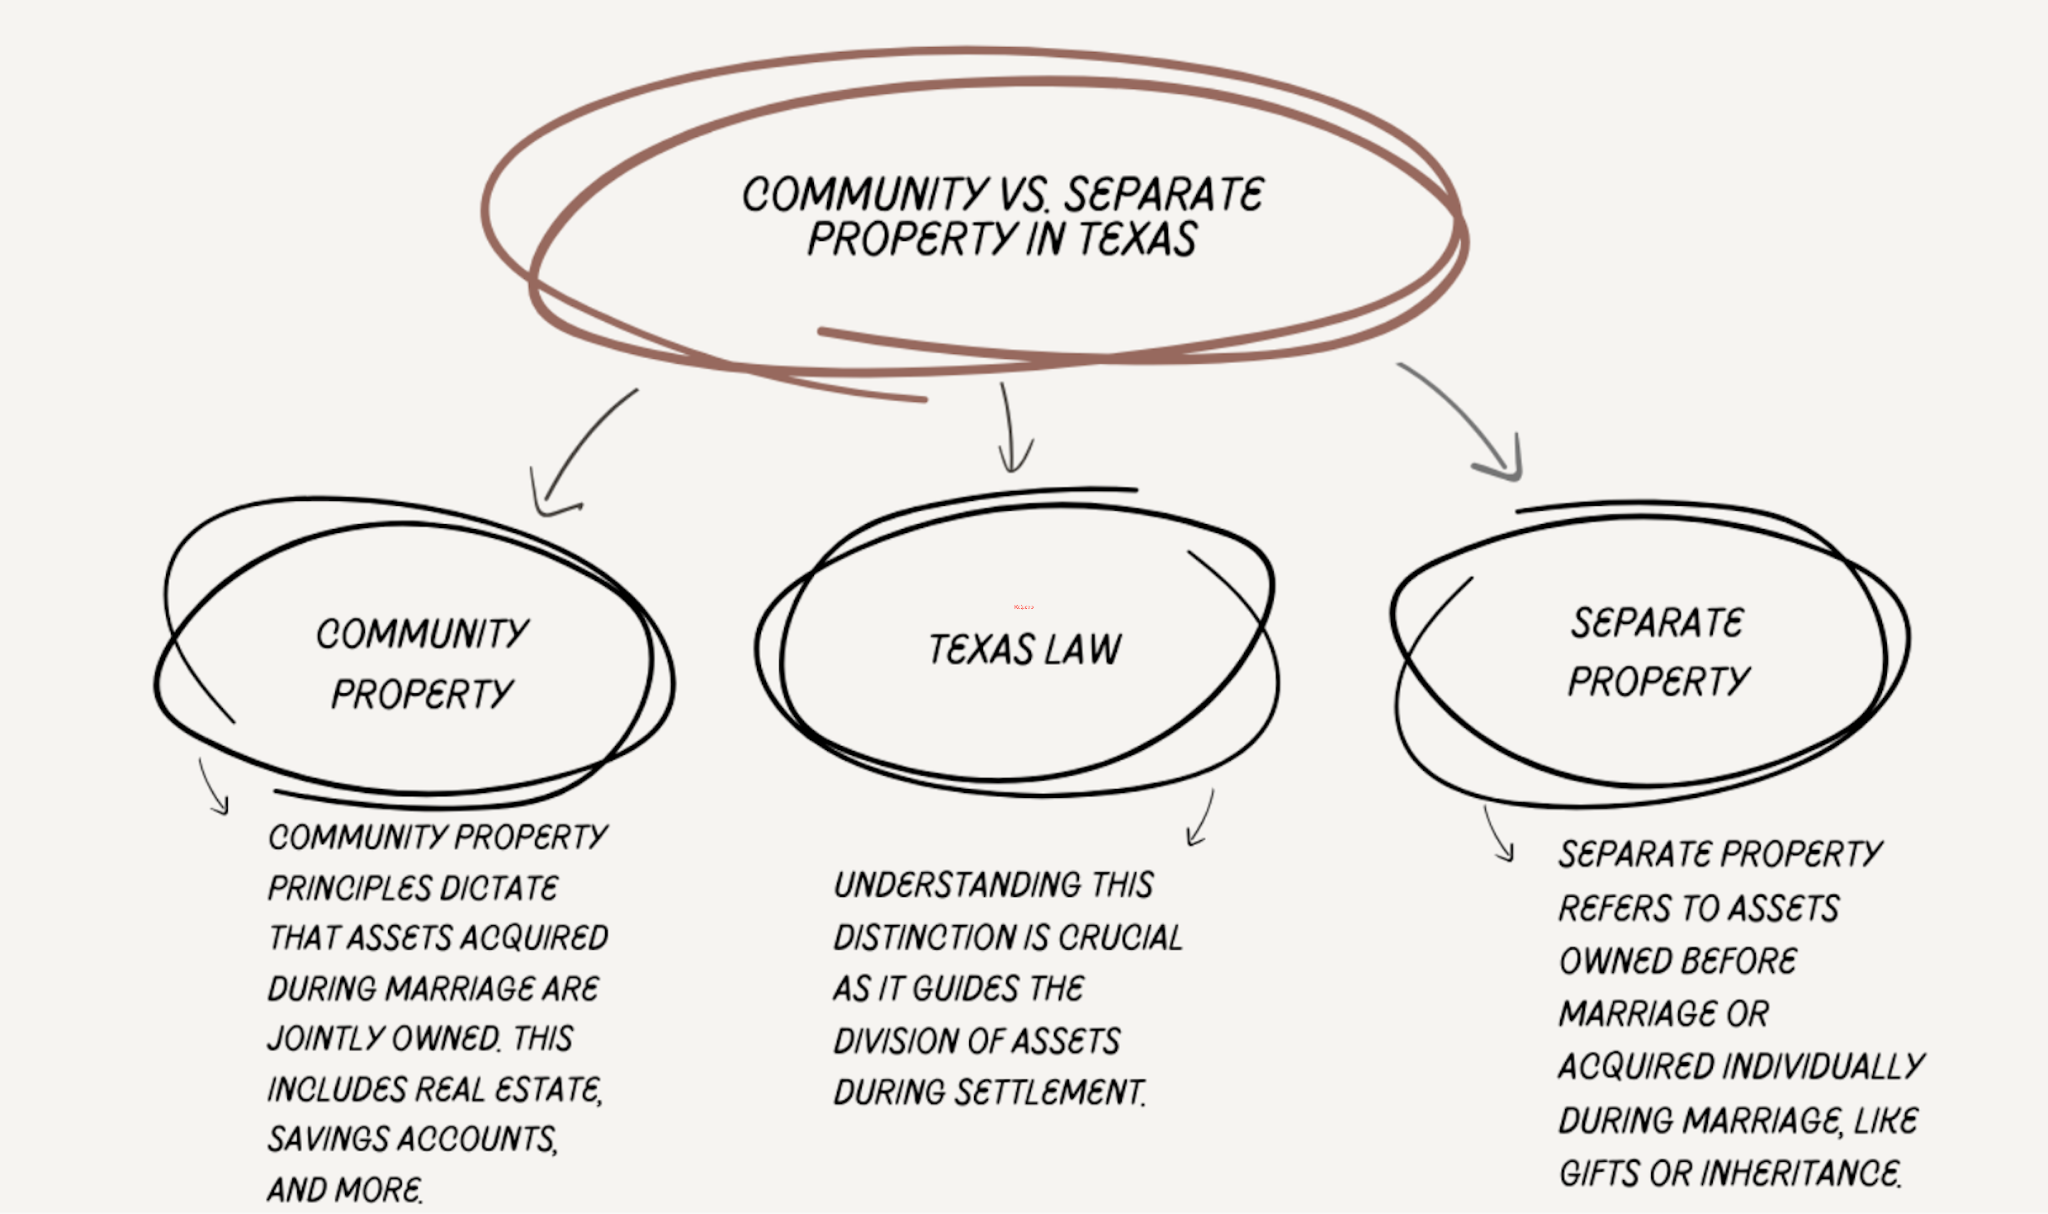 Diagram explaining the distinction between community property and separate property under Texas law, and emphasizing the importance of this division for asset distribution during legal settlements,.